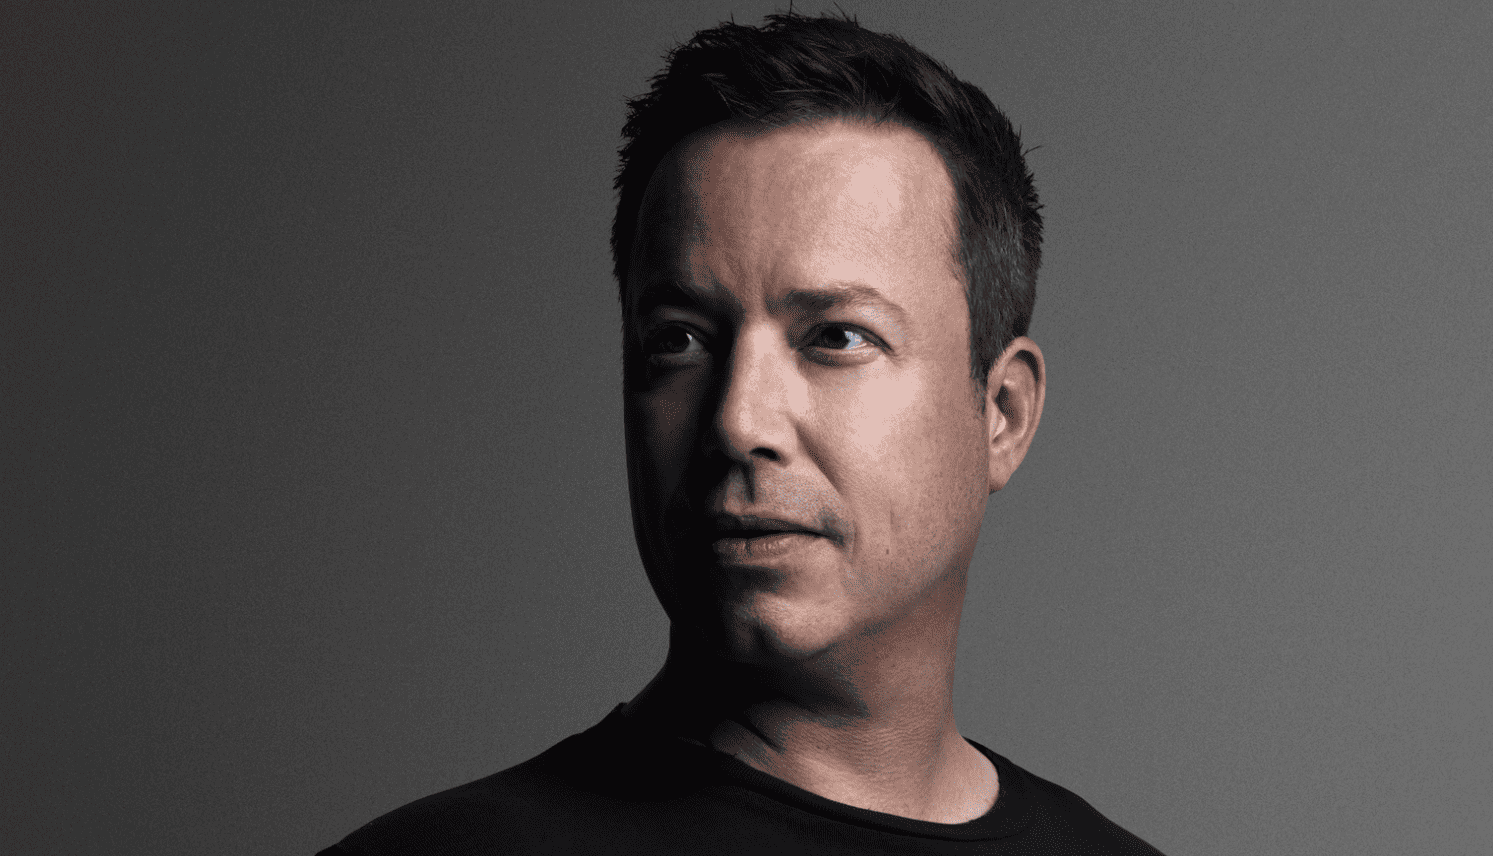 Sander van Doorn teams up with Jantine on new release ‘No Limit To Our Love’: Listen